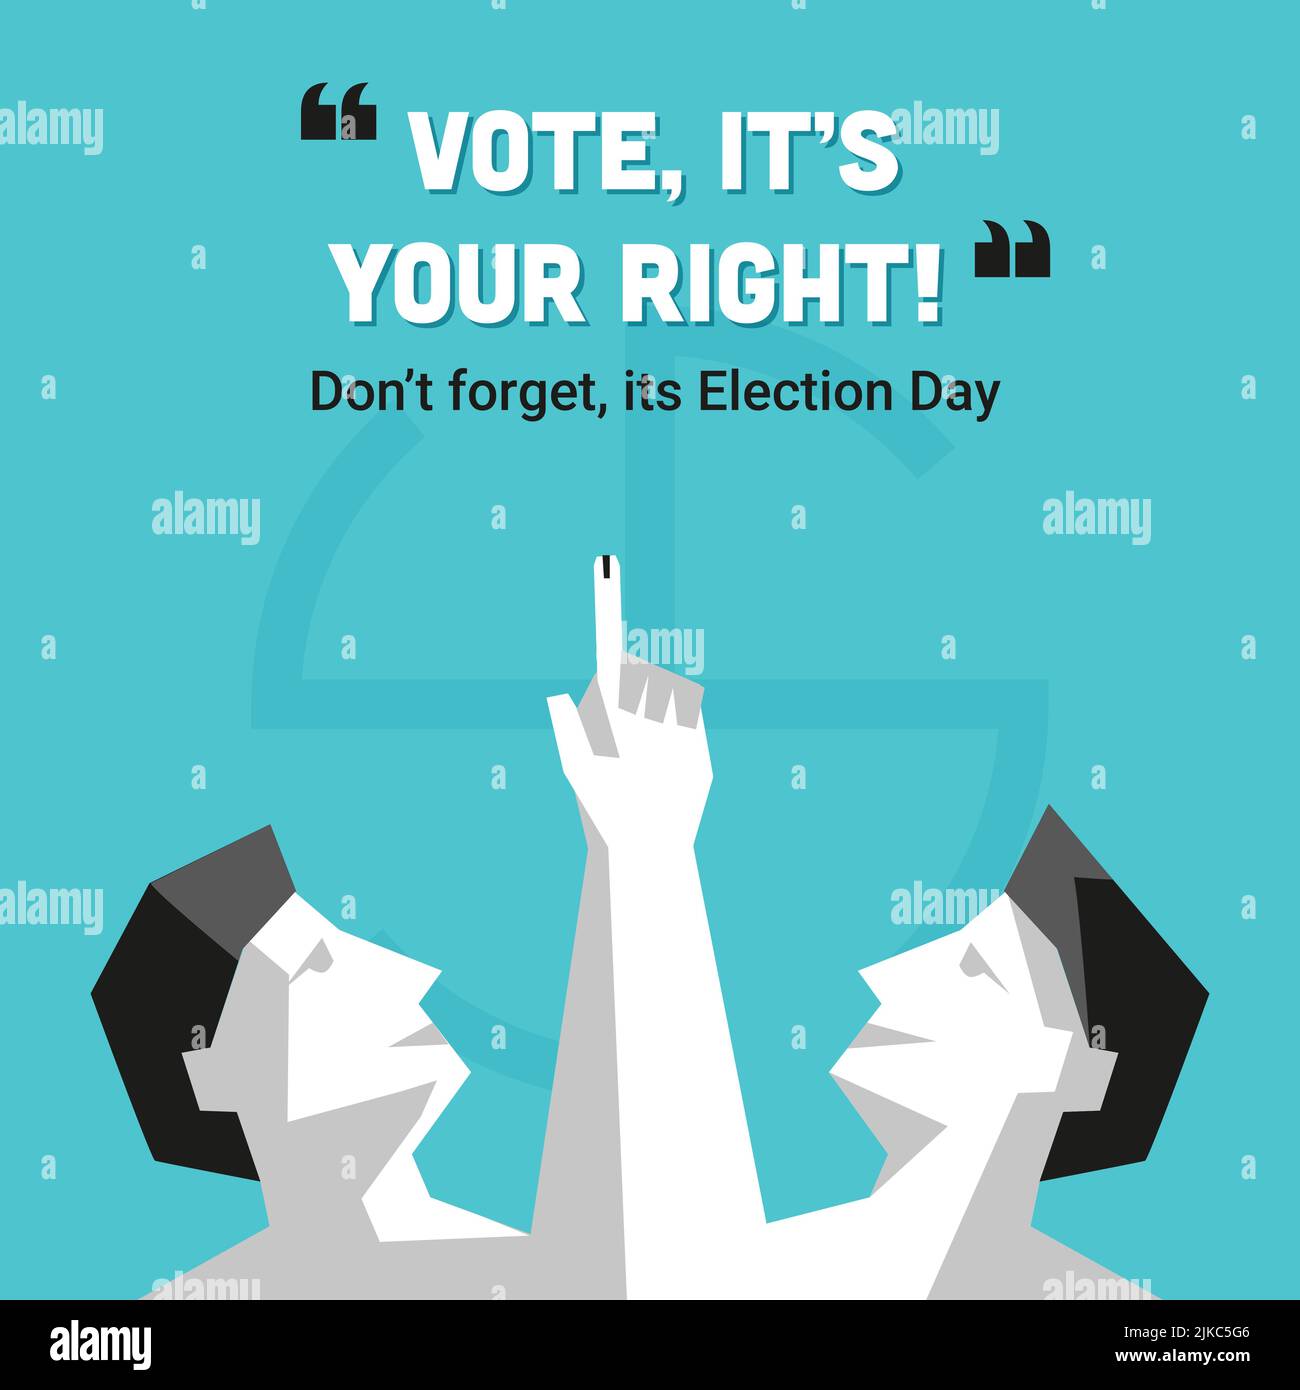 Vote, It's Your Right And Don't Forget Election Day Concept With Cartoon Voter Men Folded Hands And Showing Index Finger On Blue Background. Stock Vector